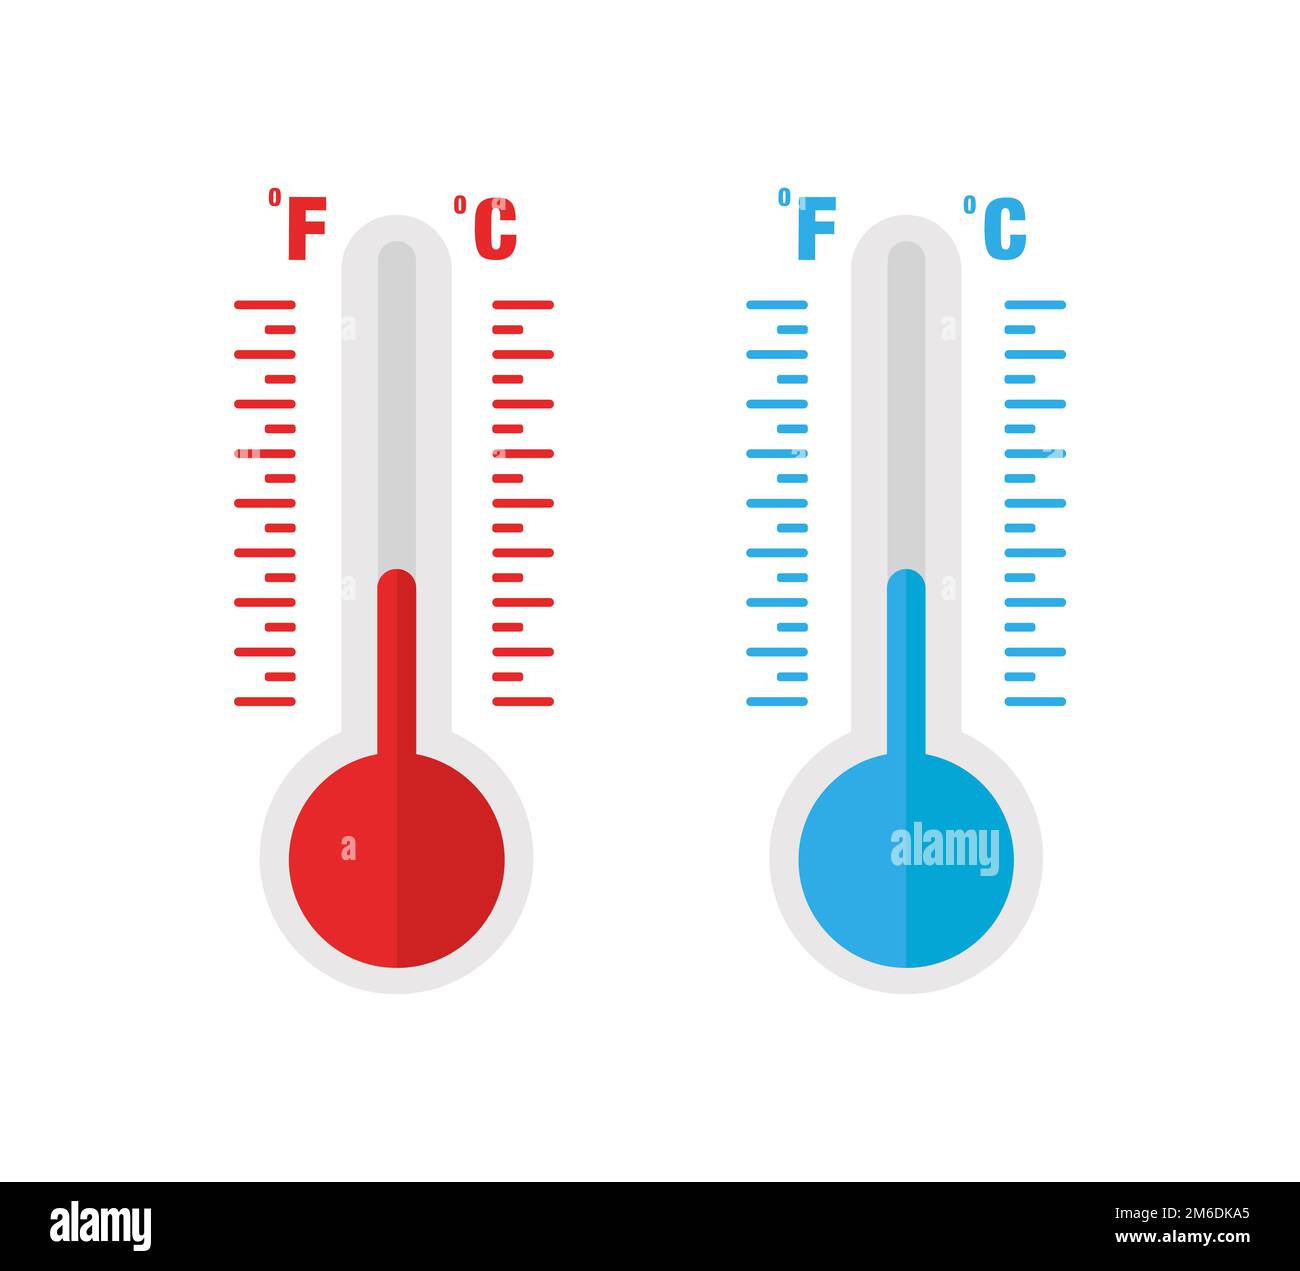 https://c8.alamy.com/comp/2M6DKA5/thermometer-red-and-blue-colors-isolated-on-white-background-trendy-flat-style-temperature-indicator-cold-or-hot-weather-2M6DKA5.jpg